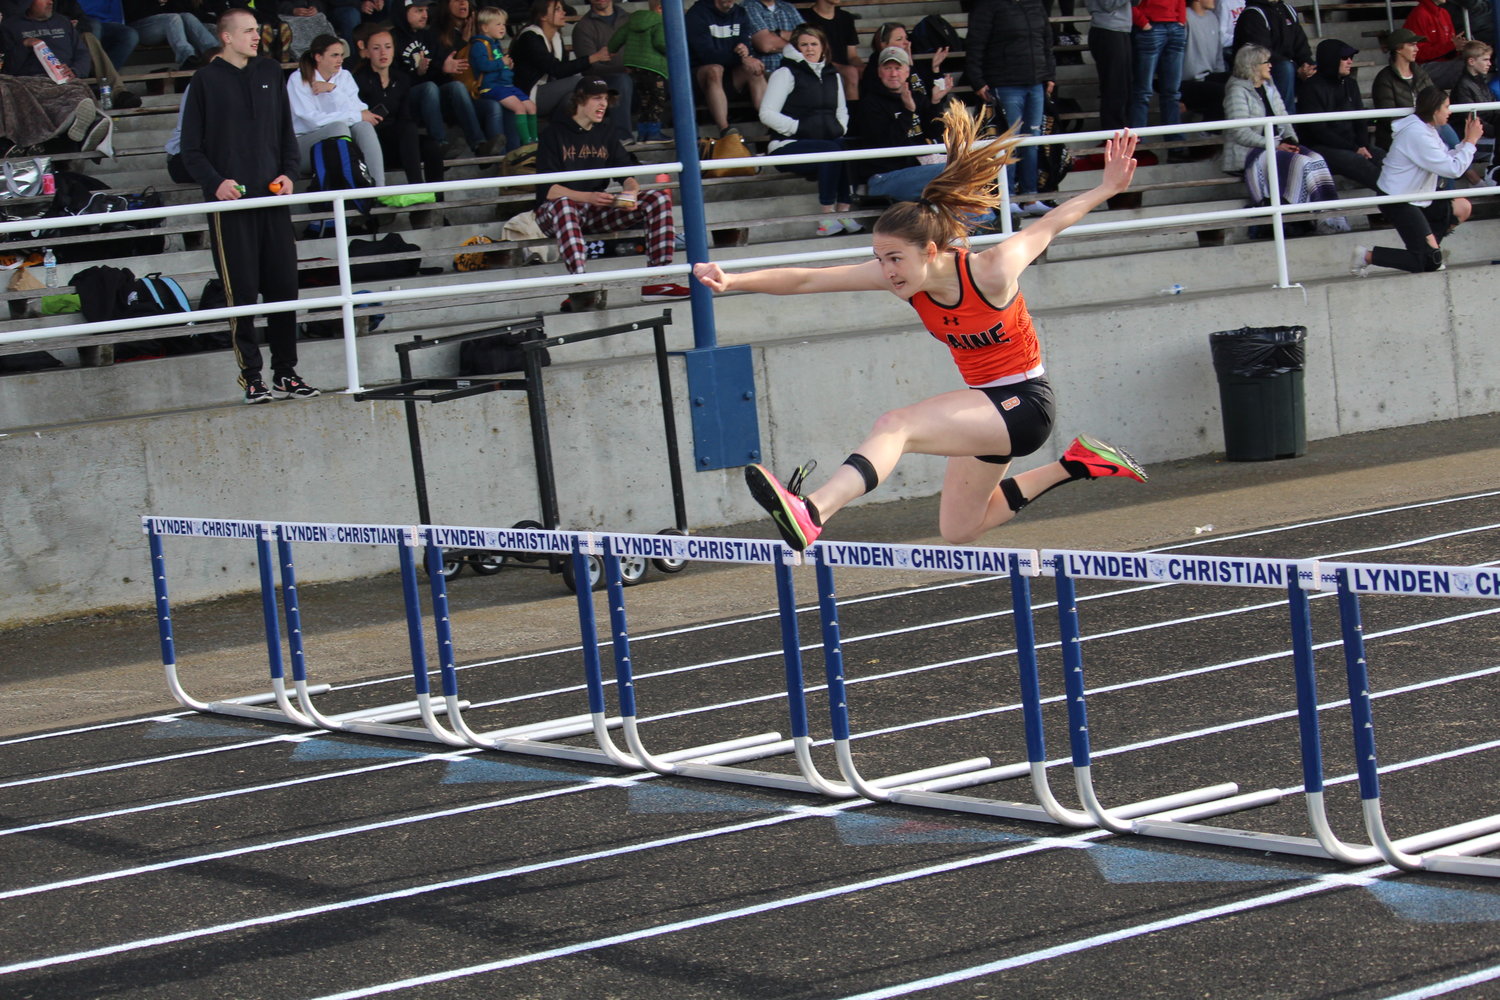 Eleeshiyah Faulkner in the 300-meter hurdles at the 1A district championship meet at Lynden Christian High School on May 13.